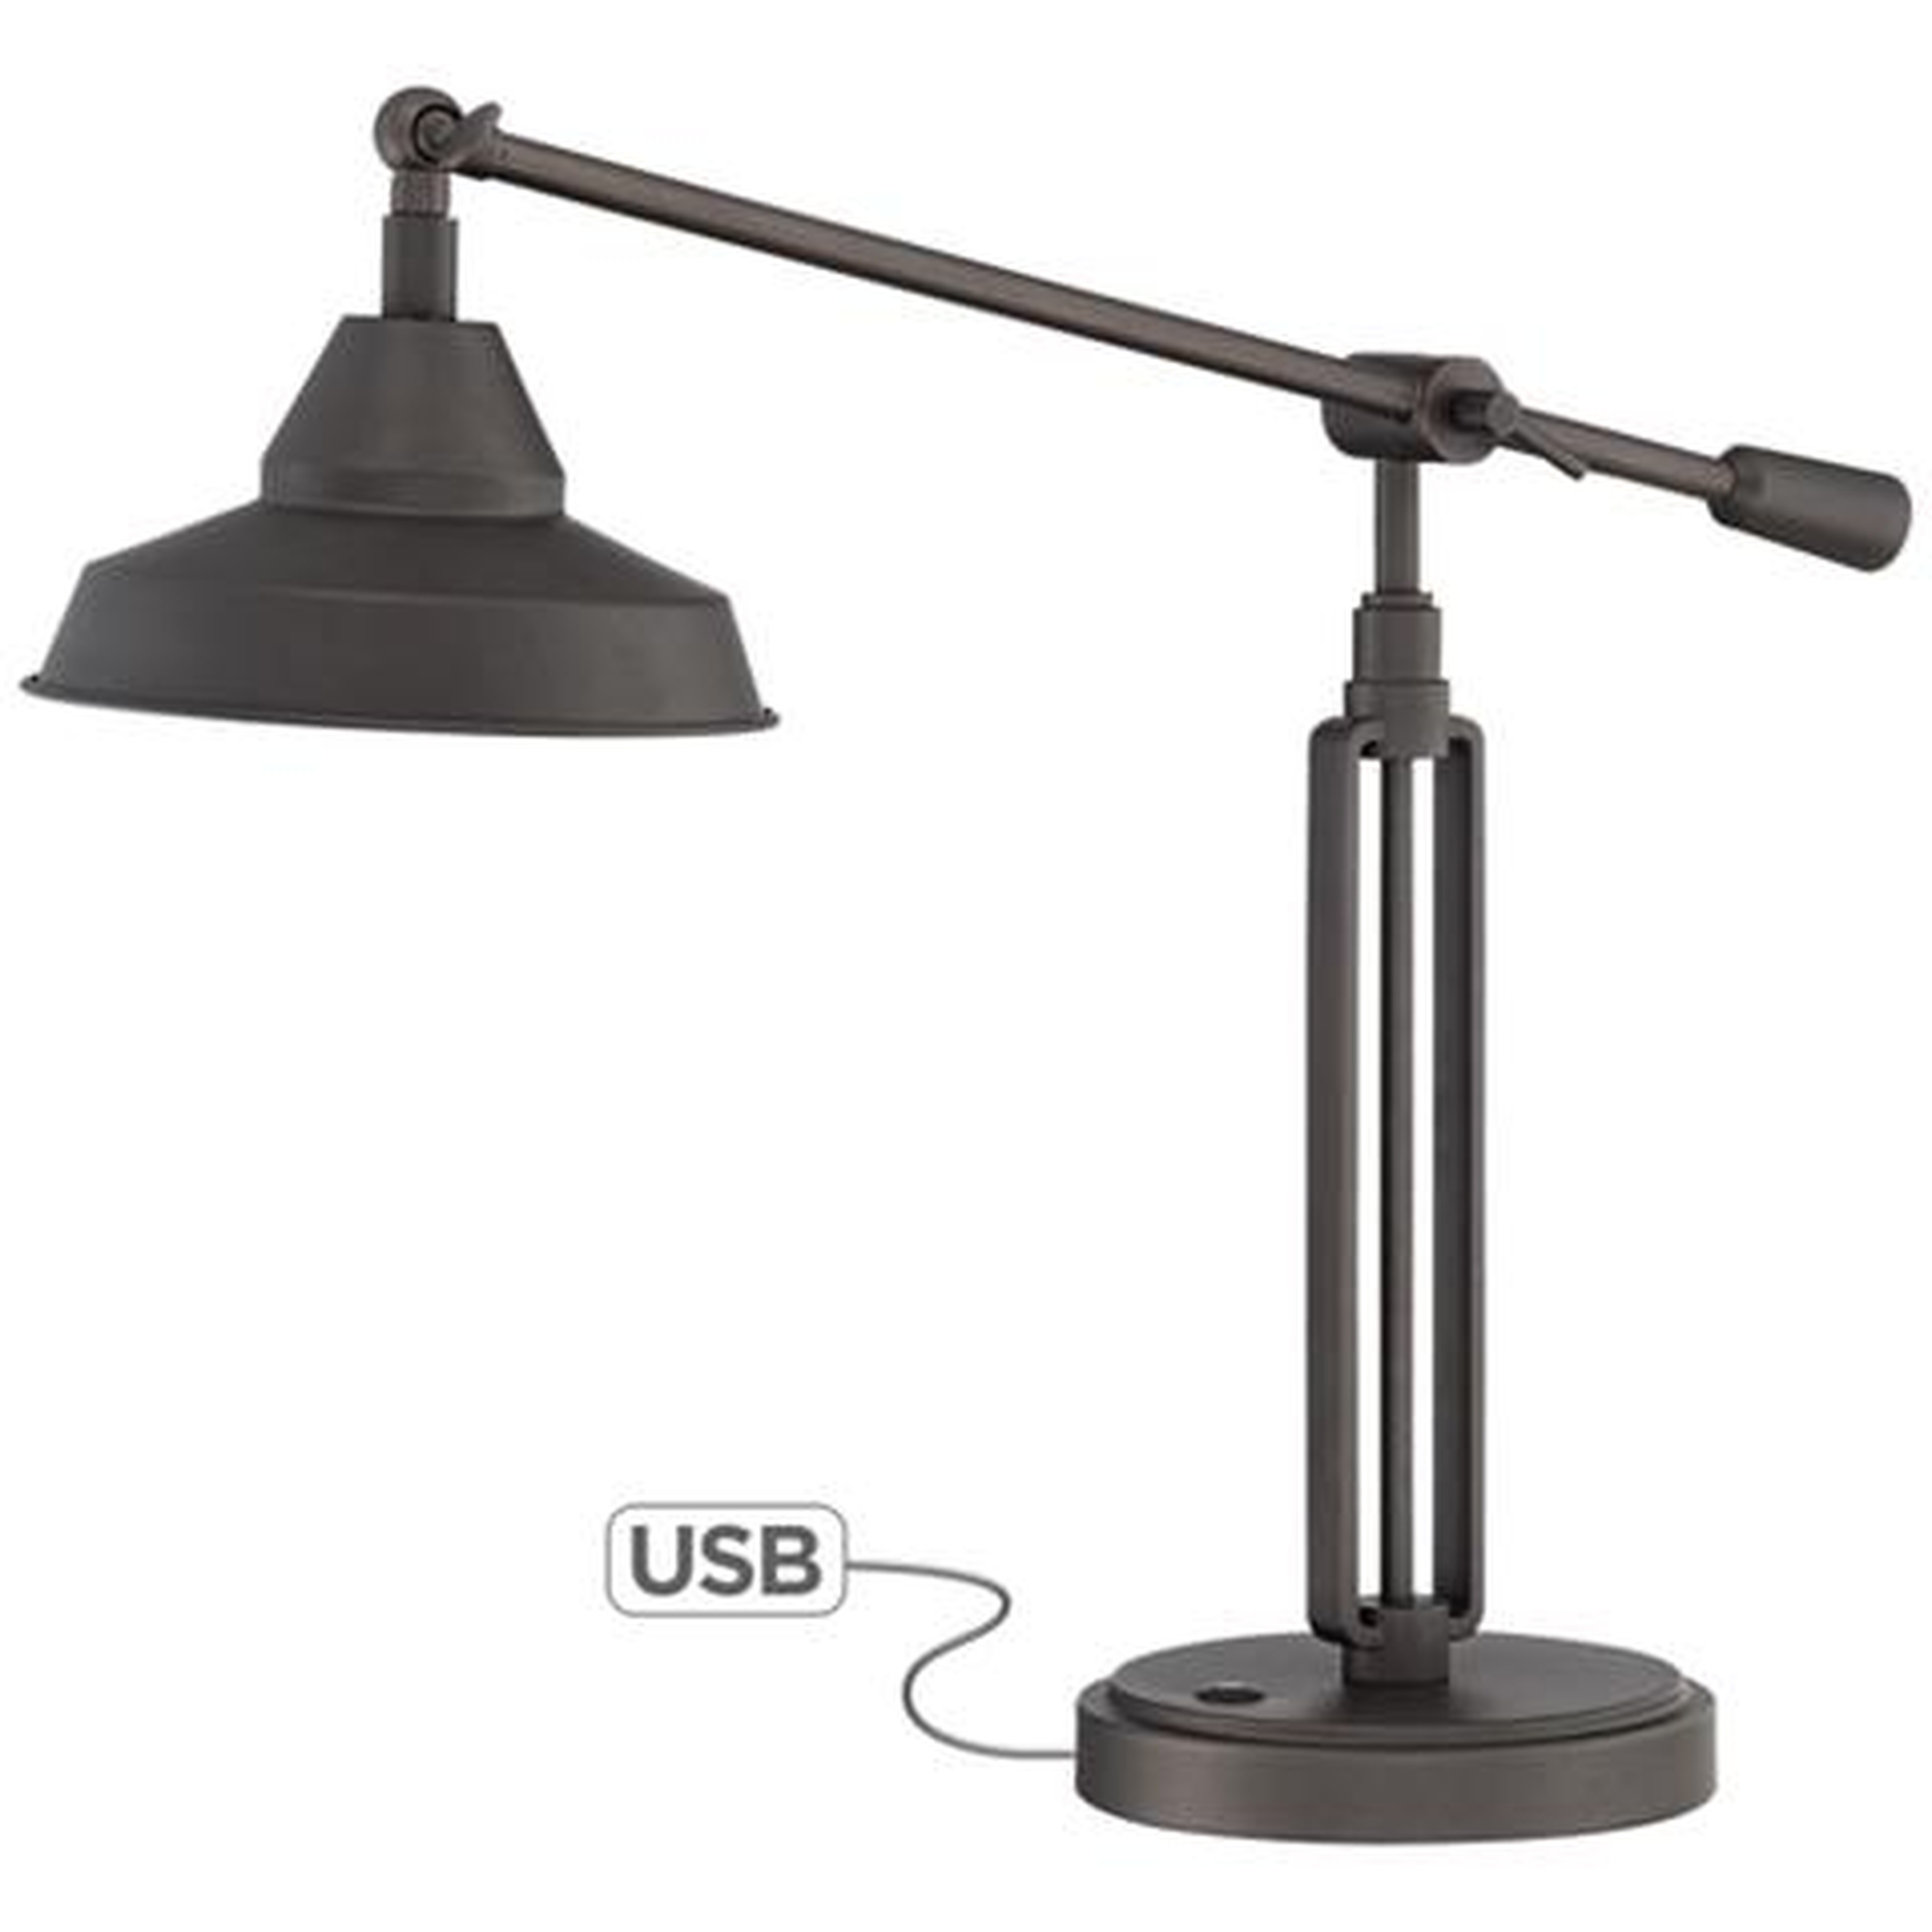 Franklin Iron Works Turnbuckle LED Desk Lamp With USB Port - Lamps Plus